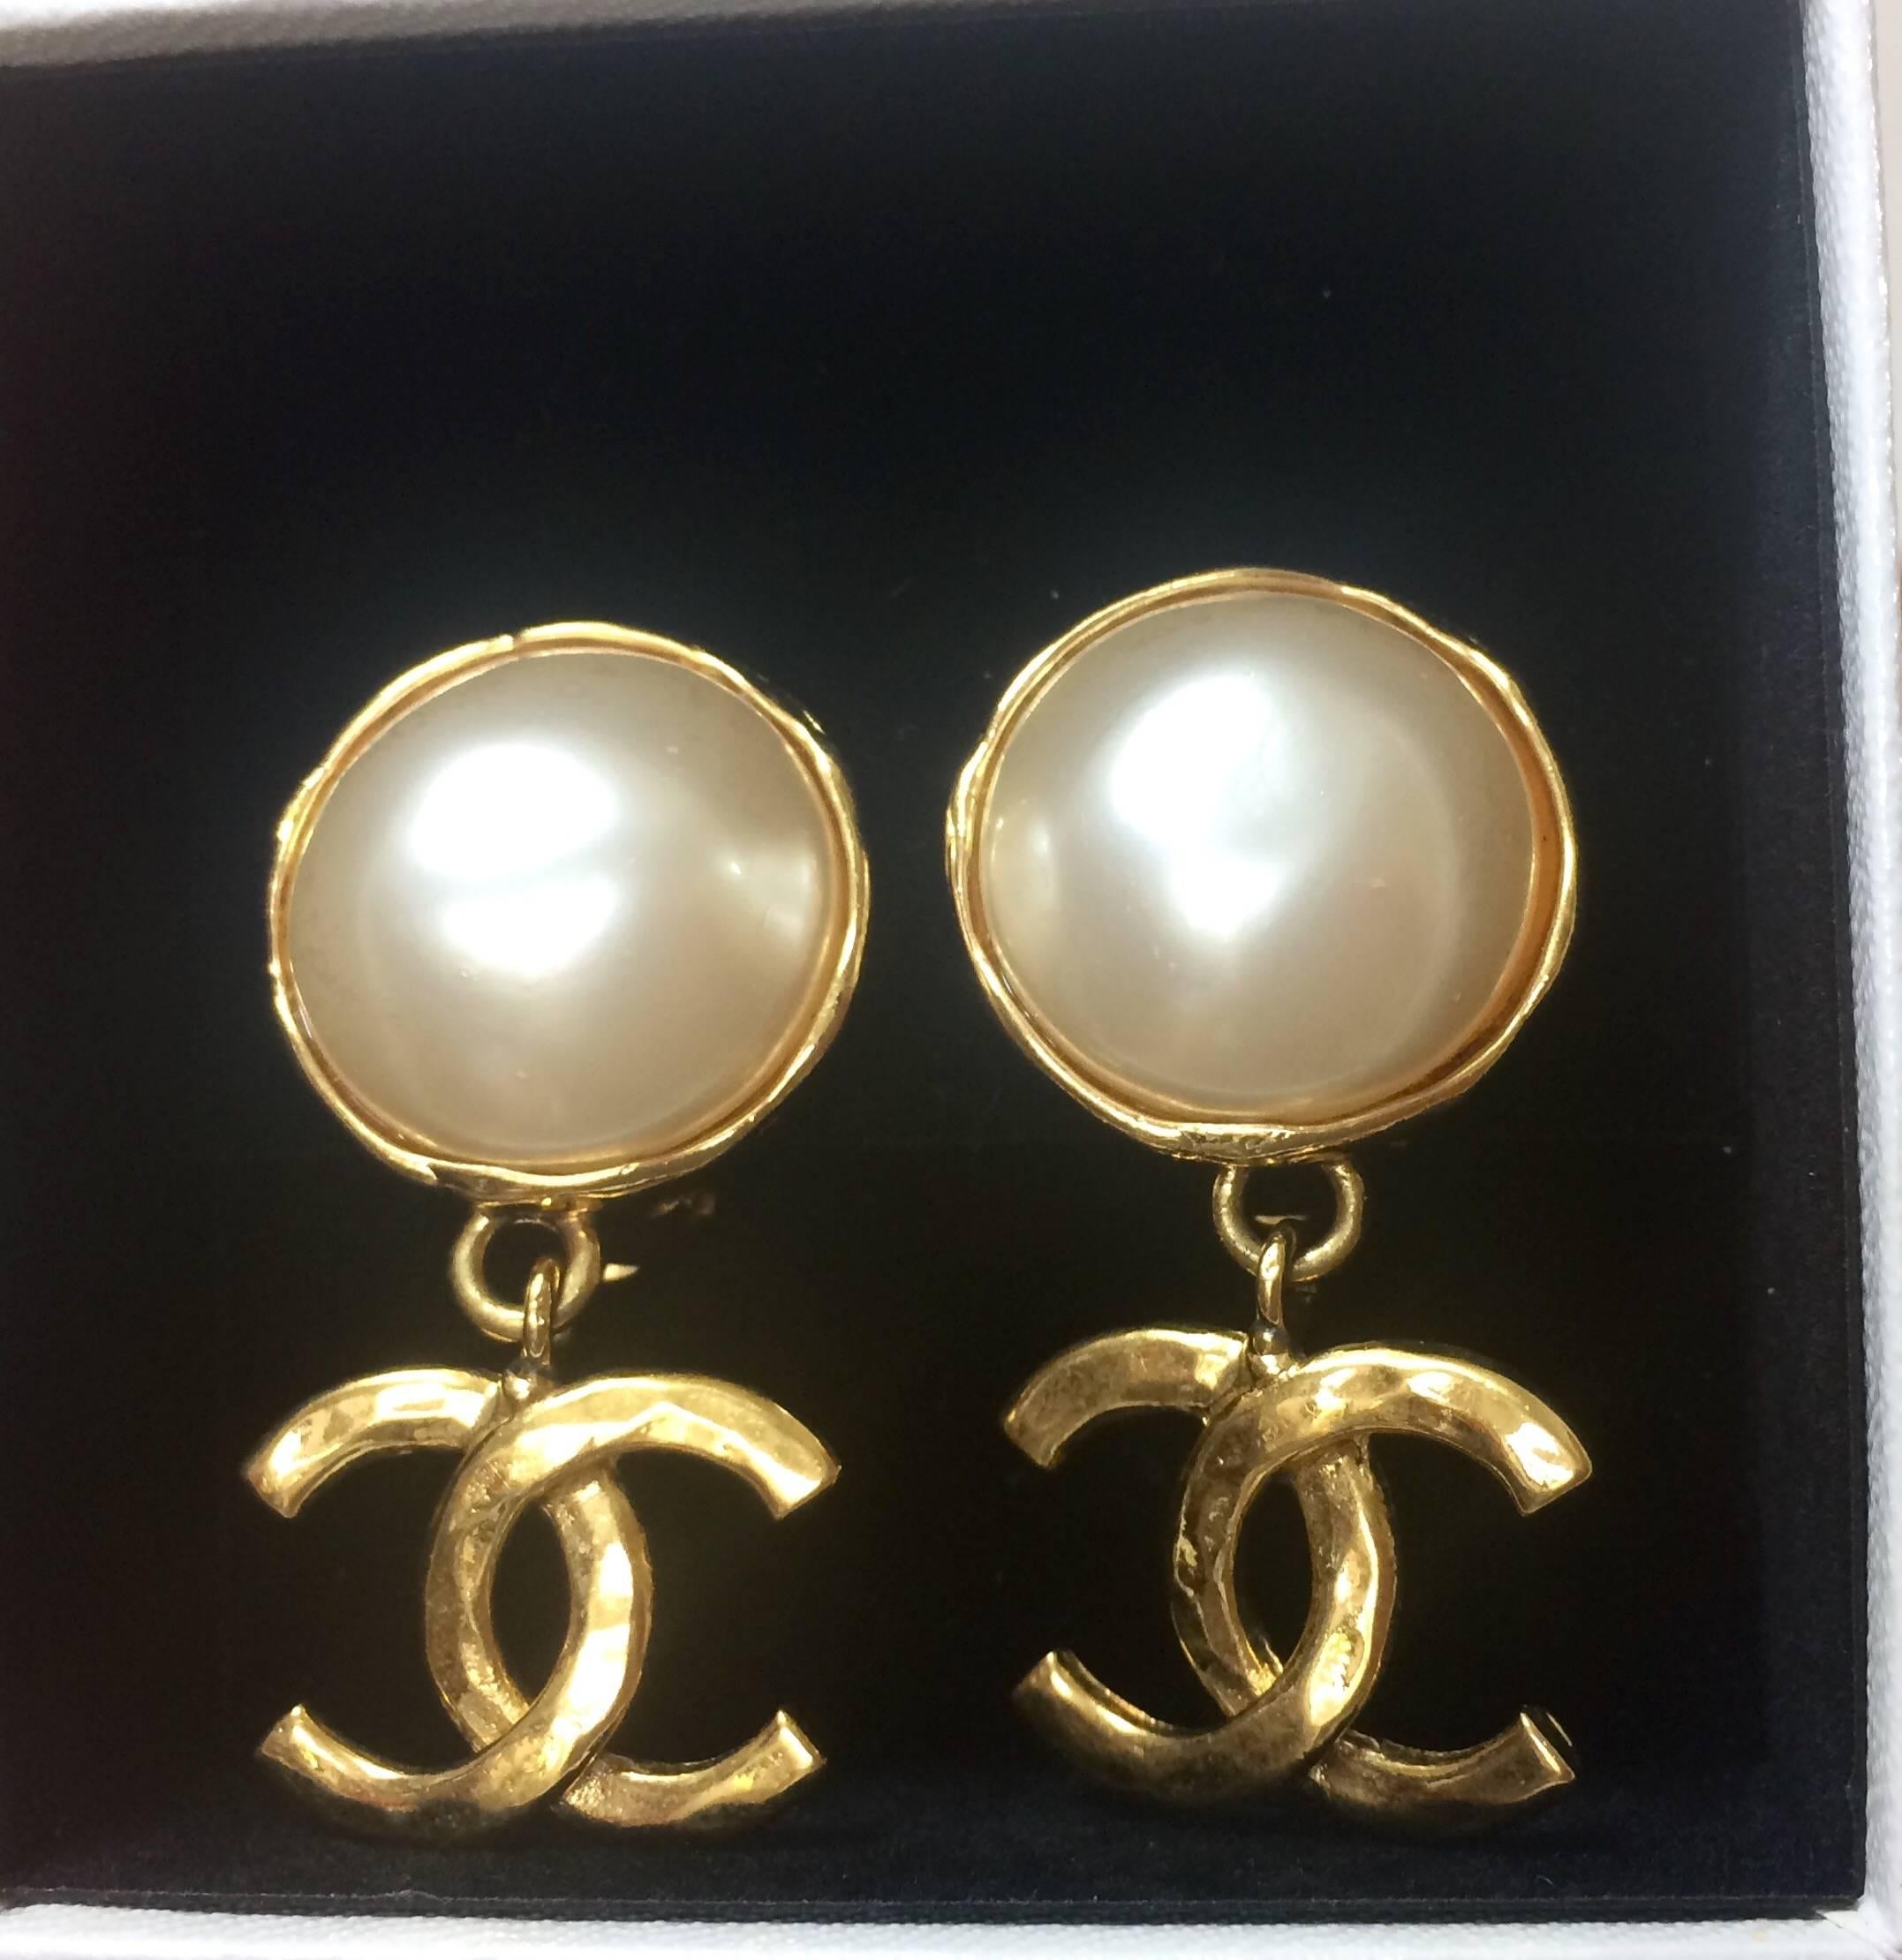 1990s. MINT. Vintage CHANEL white faux pearl and golden dangling earrings. Iconic CC mark. Hot gift.

Introducing a MINT/excellent condition vintage CHANEL faux pearl earrings with golden CC marks that dangle as you move!
 
Wearing these earrings